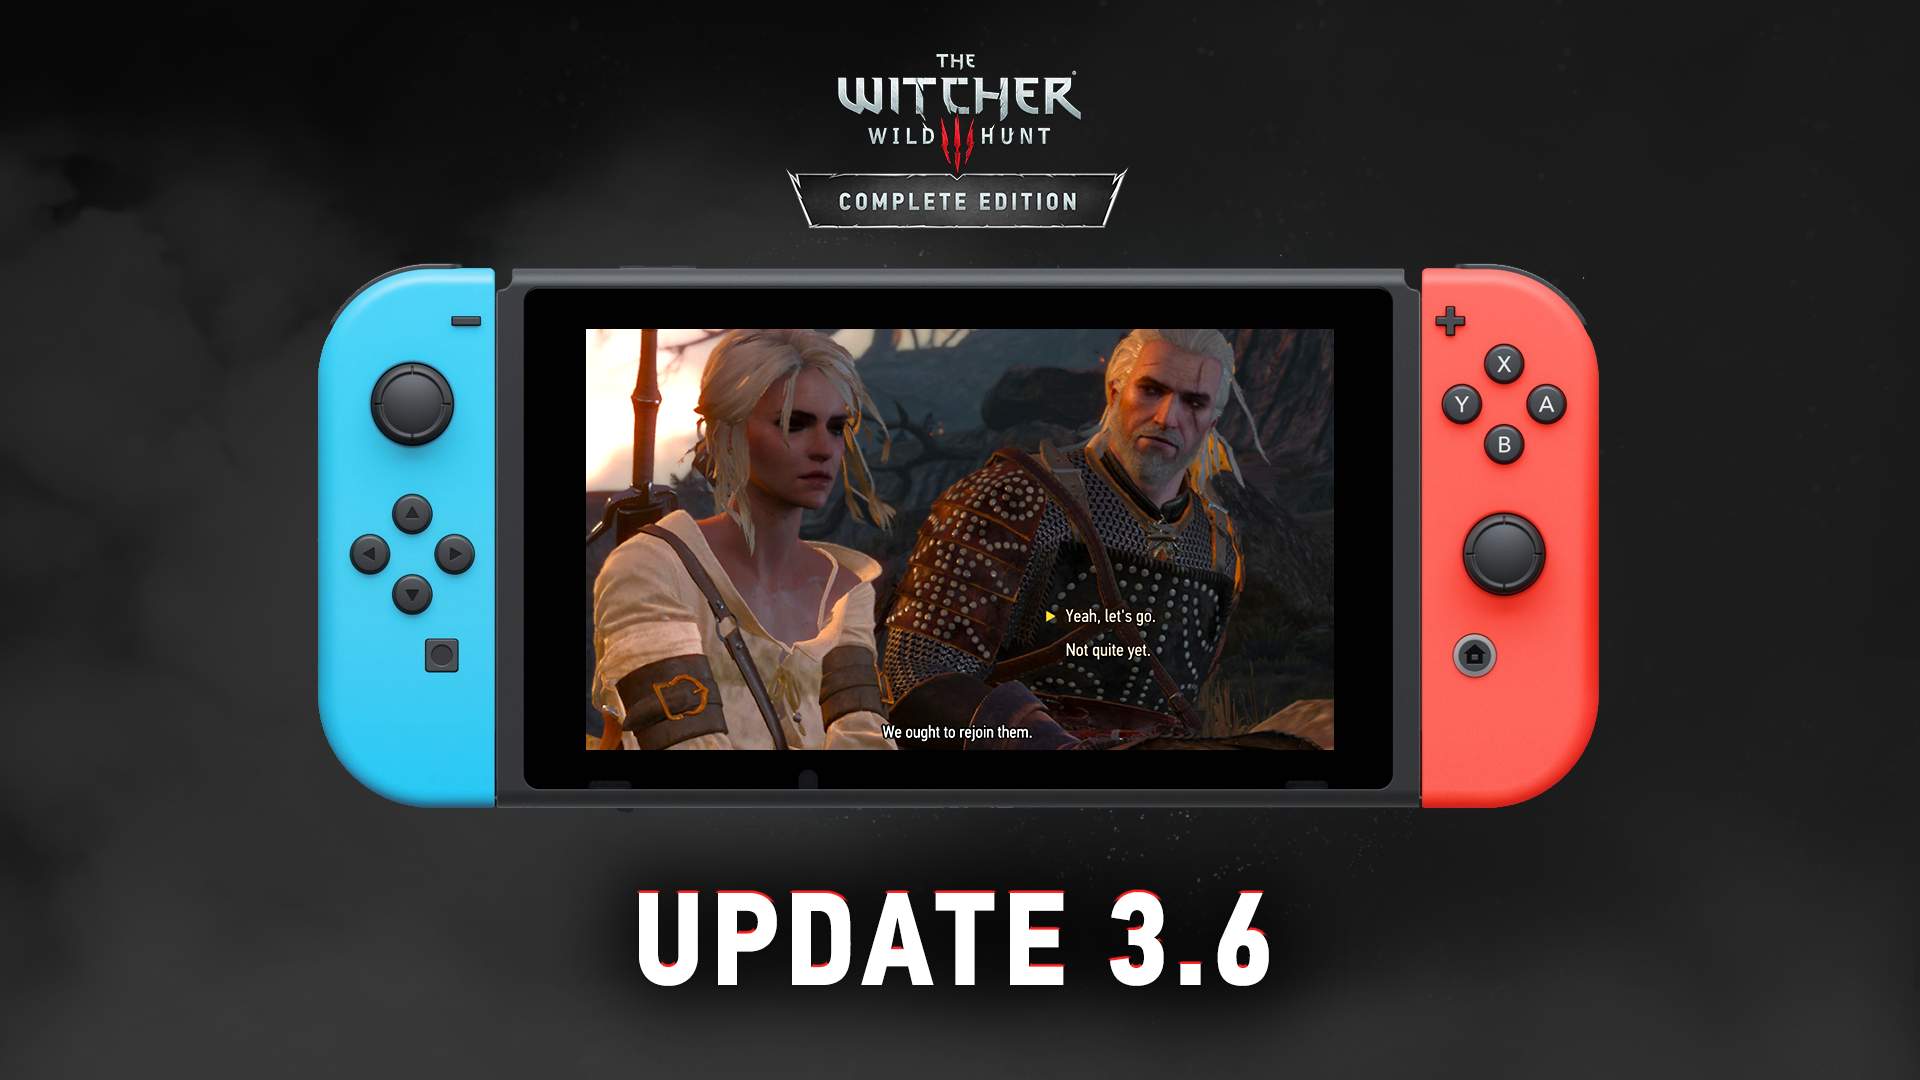 the witcher 3 switch reddit